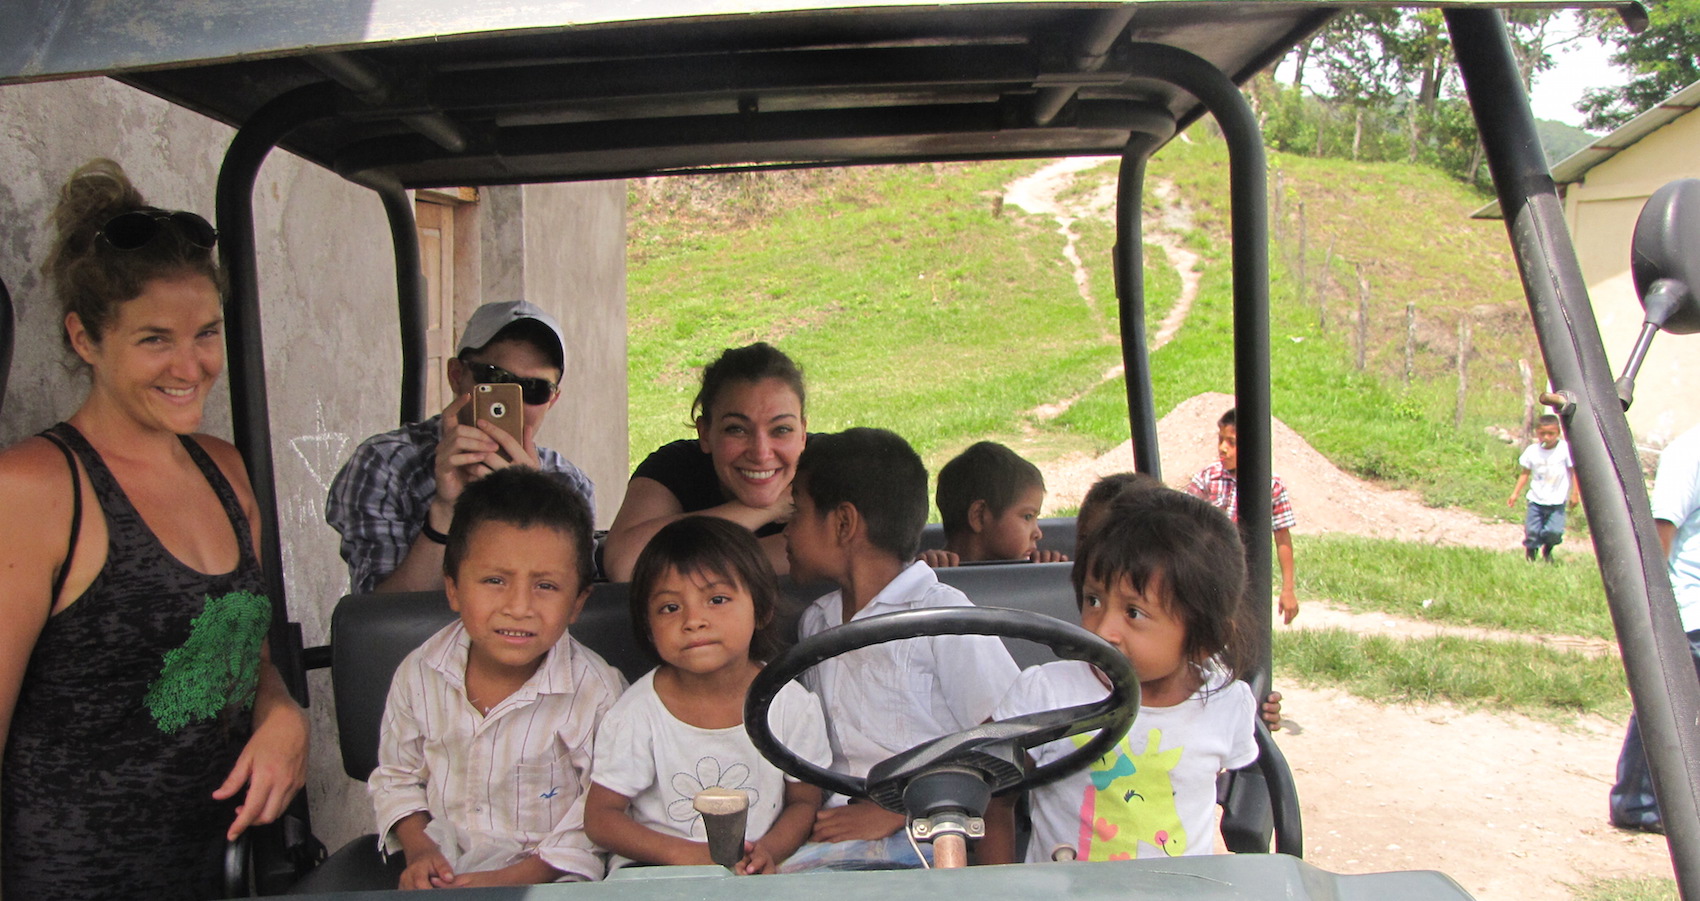 What's involved with a volunteer trip - Honduras - Paramedics for Children